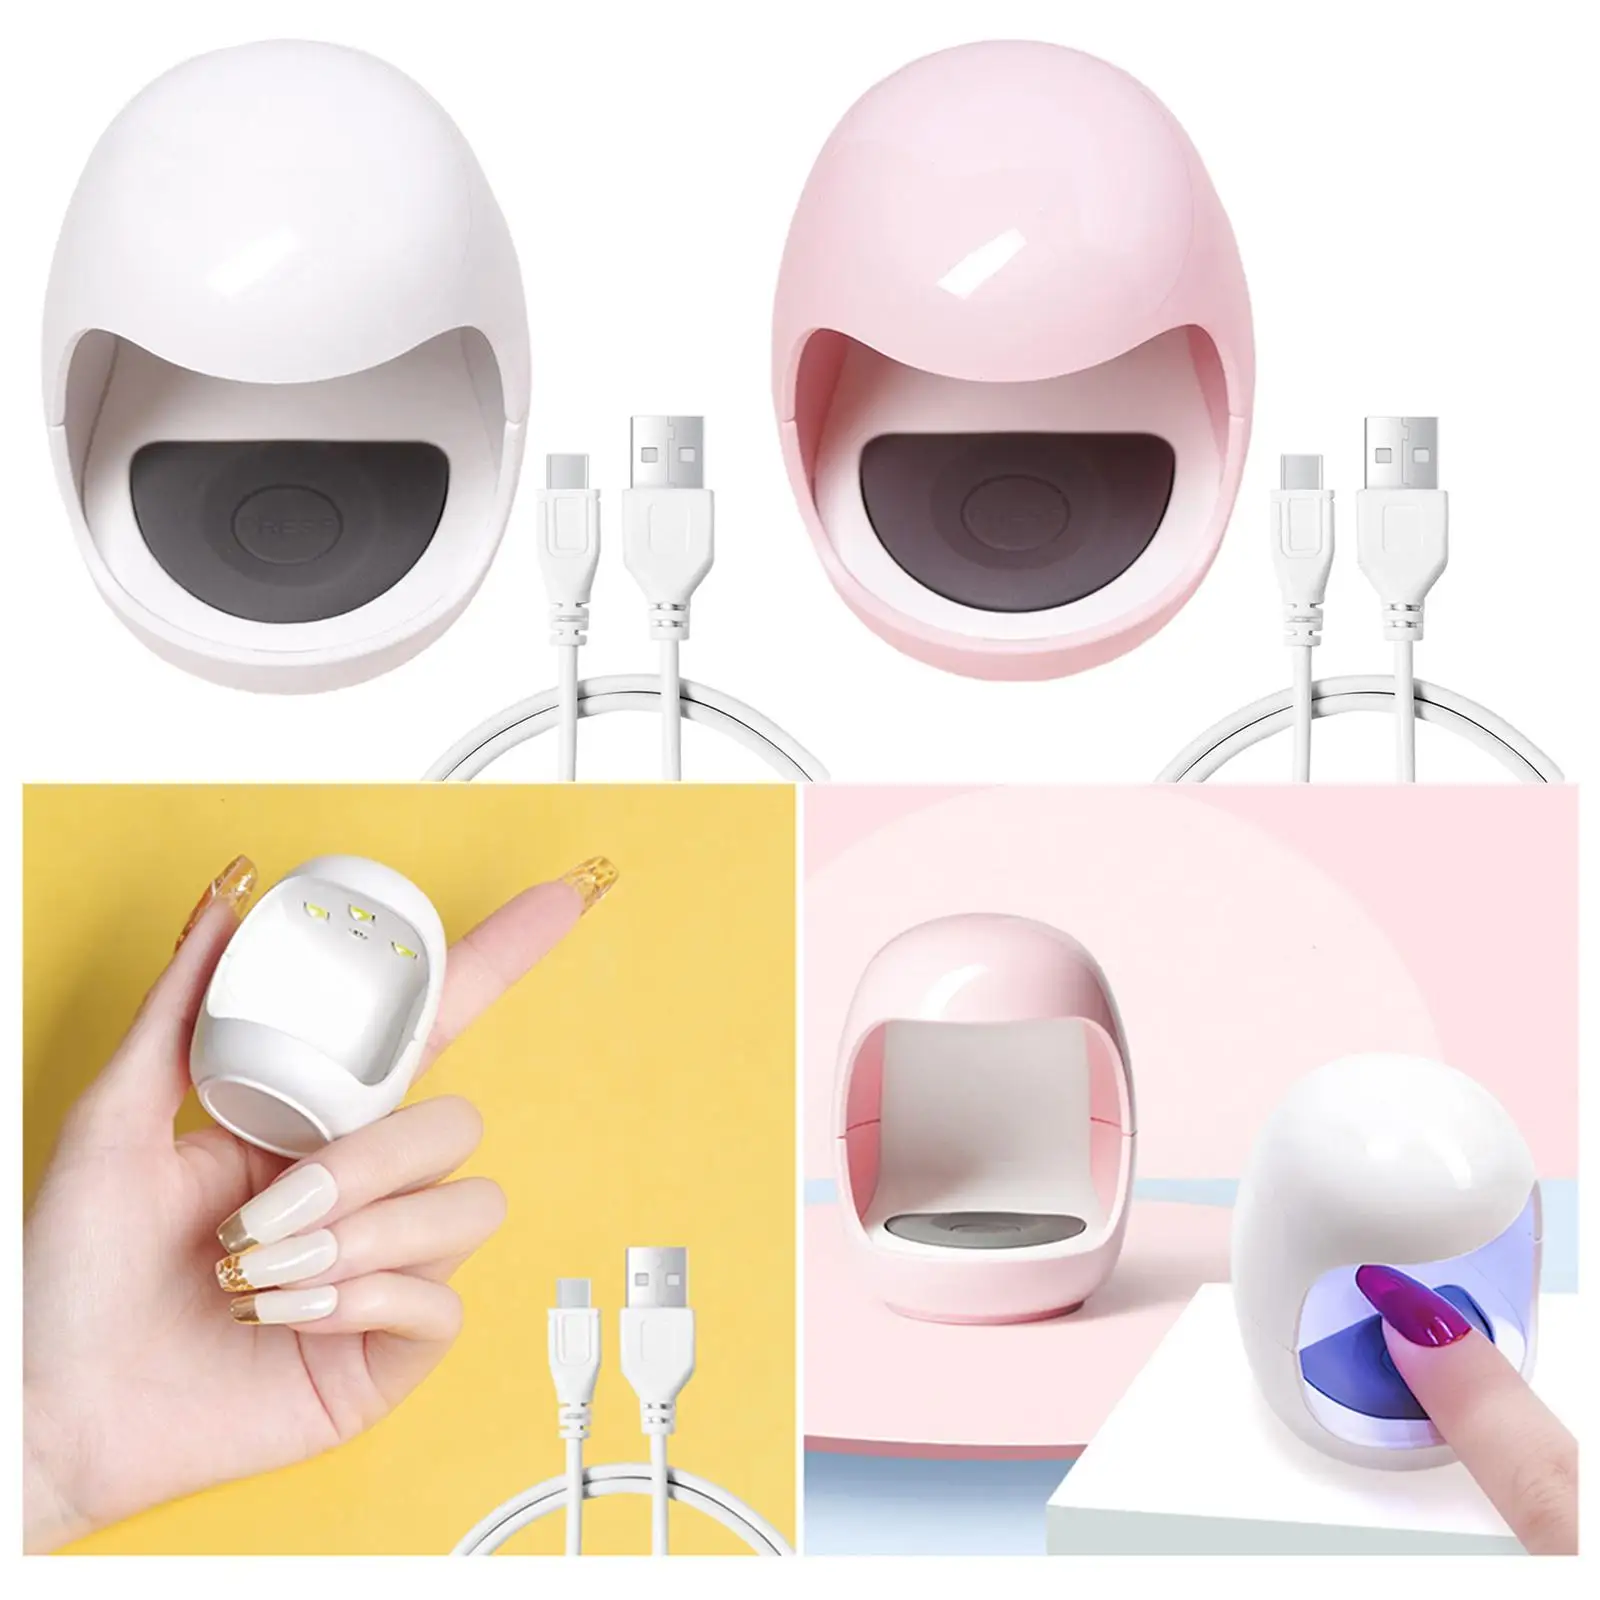 Nail Dryer USB Charge Fast Finger Nails Art Tool Nail Polish Curing Lamps for Gel Polish School Kids Acrylic Nails Accessories